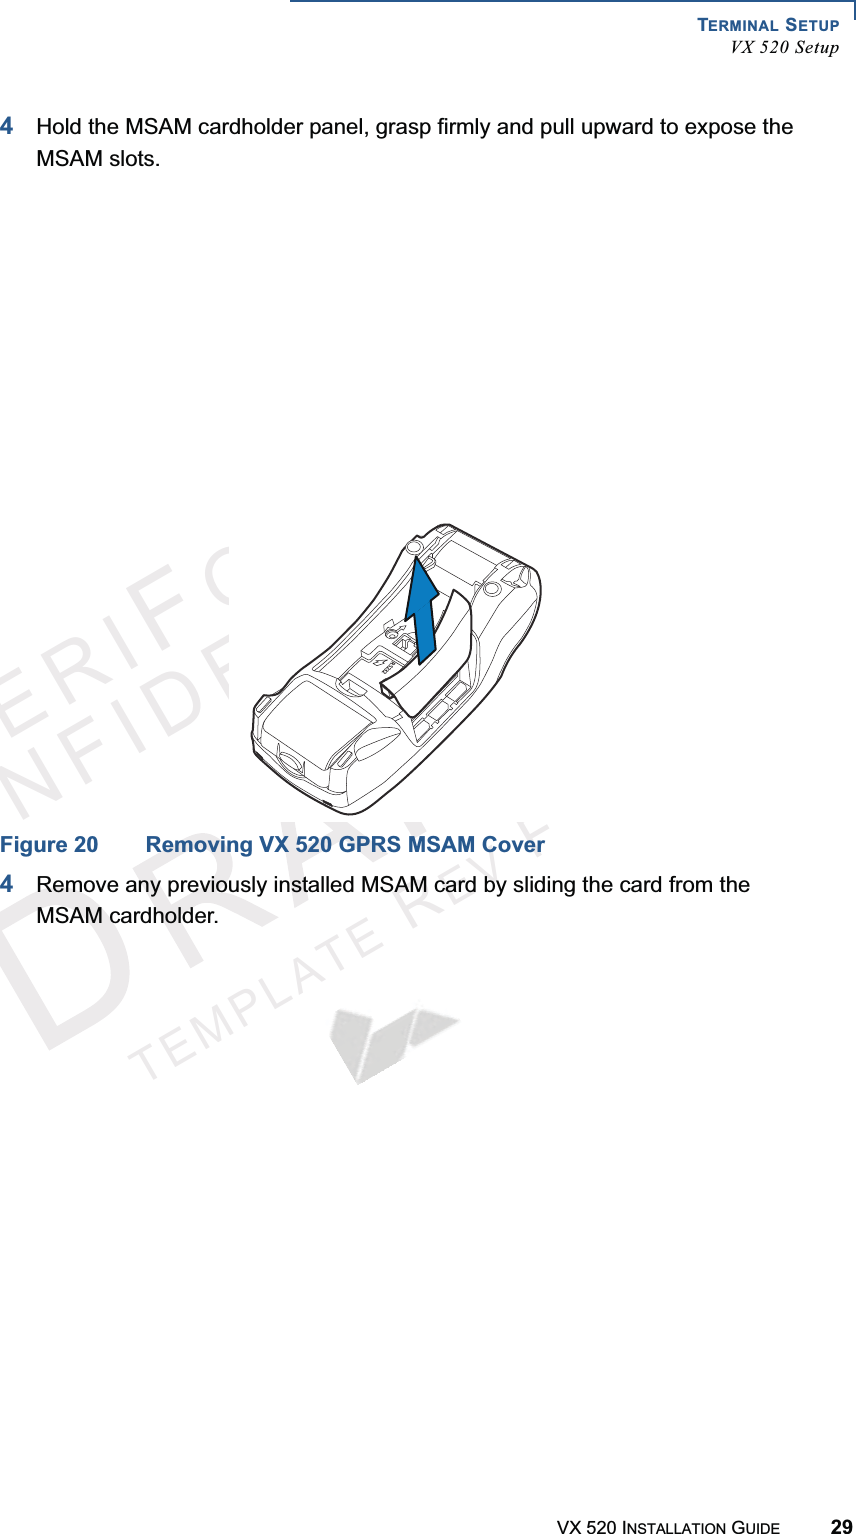 TERMINAL SETUPVX 520 SetupVX 520 INSTALLATION GUIDE 29VERIFONECONFIDENTIALTEMPLATEREVF4Hold the MSAM cardholder panel, grasp firmly and pull upward to expose the MSAM slots.Figure 19 Removing VX 520 D/E MSAM CoverFigure 20 Removing VX 520 GPRS MSAM Cover4Remove any previously installed MSAM card by sliding the card from the MSAM cardholder.23%4(23